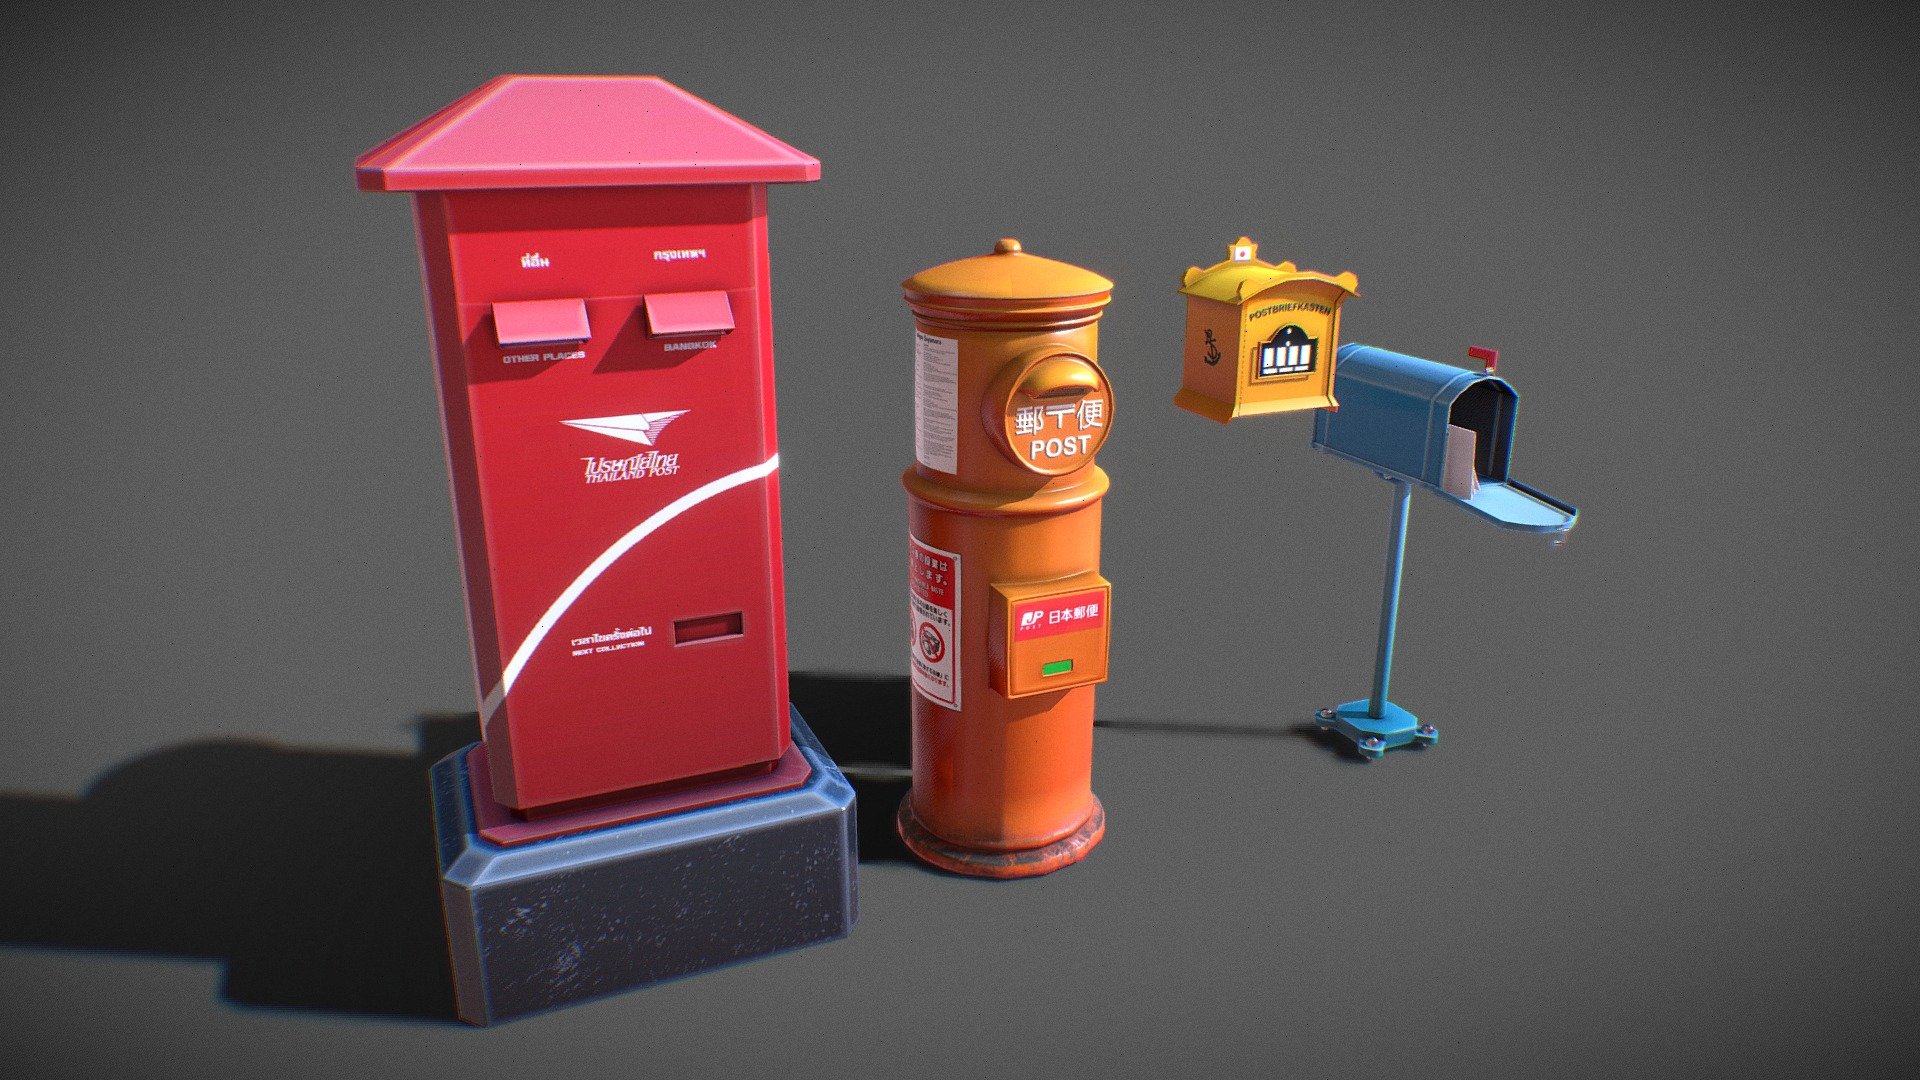 made in blender 3.4 &amp; substand painter

upload for may portfolio
 - Mailbox - 3D model by Aong 3d model